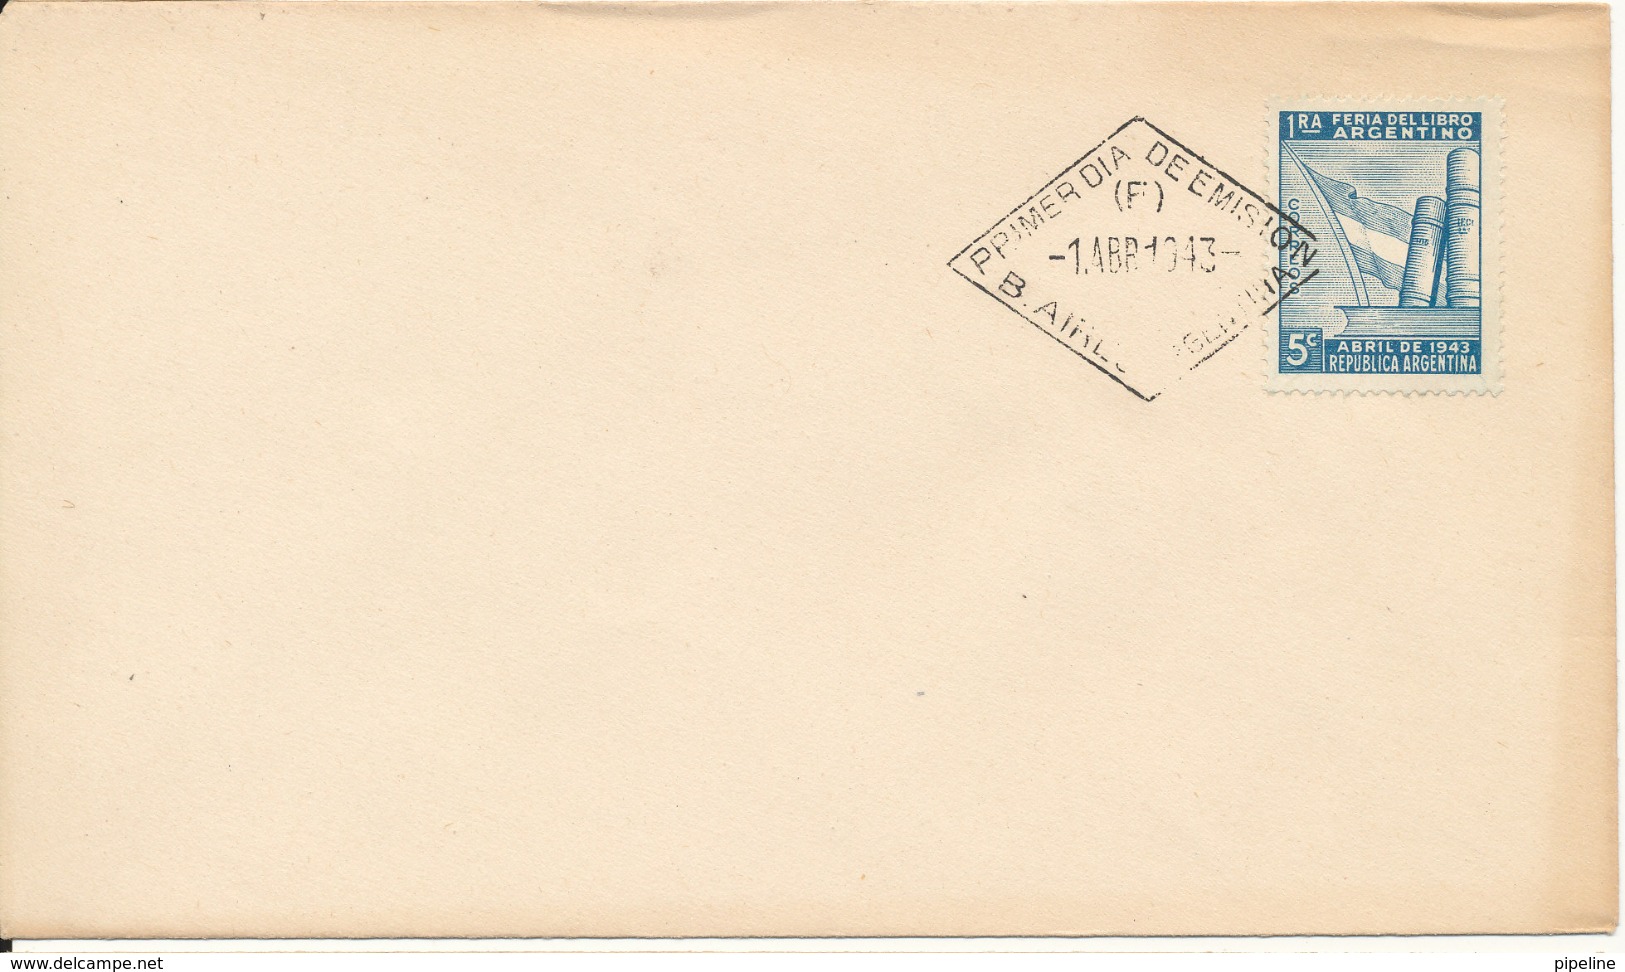 Argentina FDC 1-4-1943 First Book Fair Of Argentina - FDC